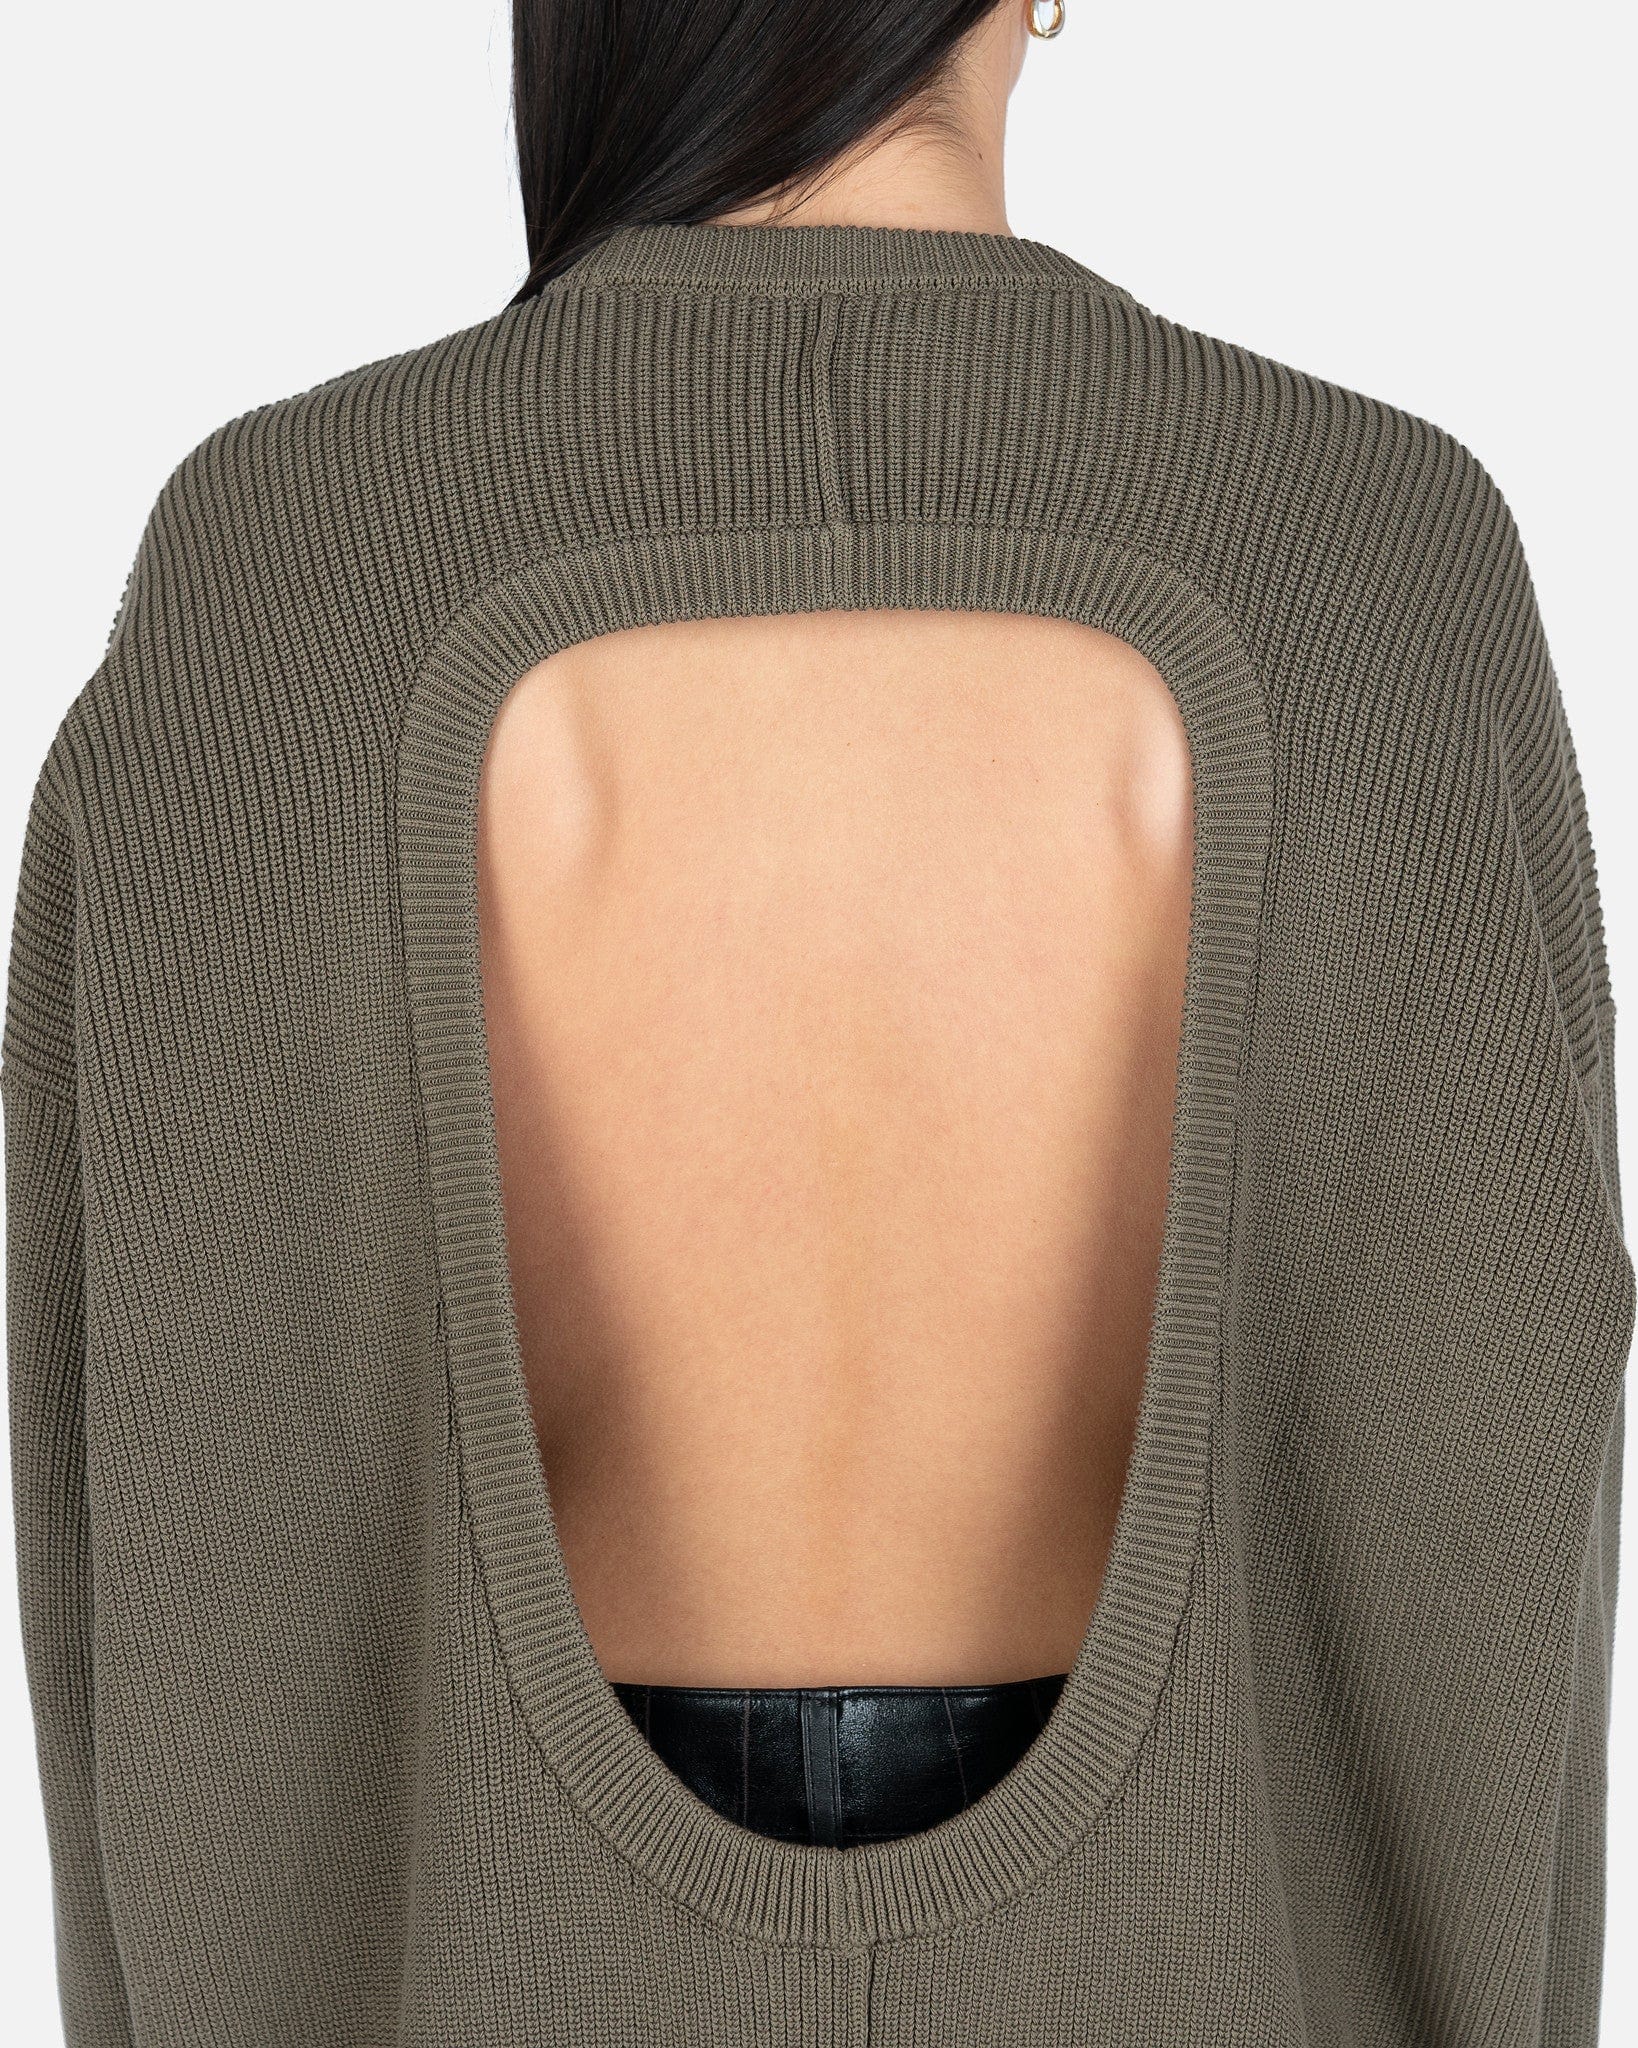 Peter Do Women Sweaters Cut Out Crew Neck Sweater in Olive